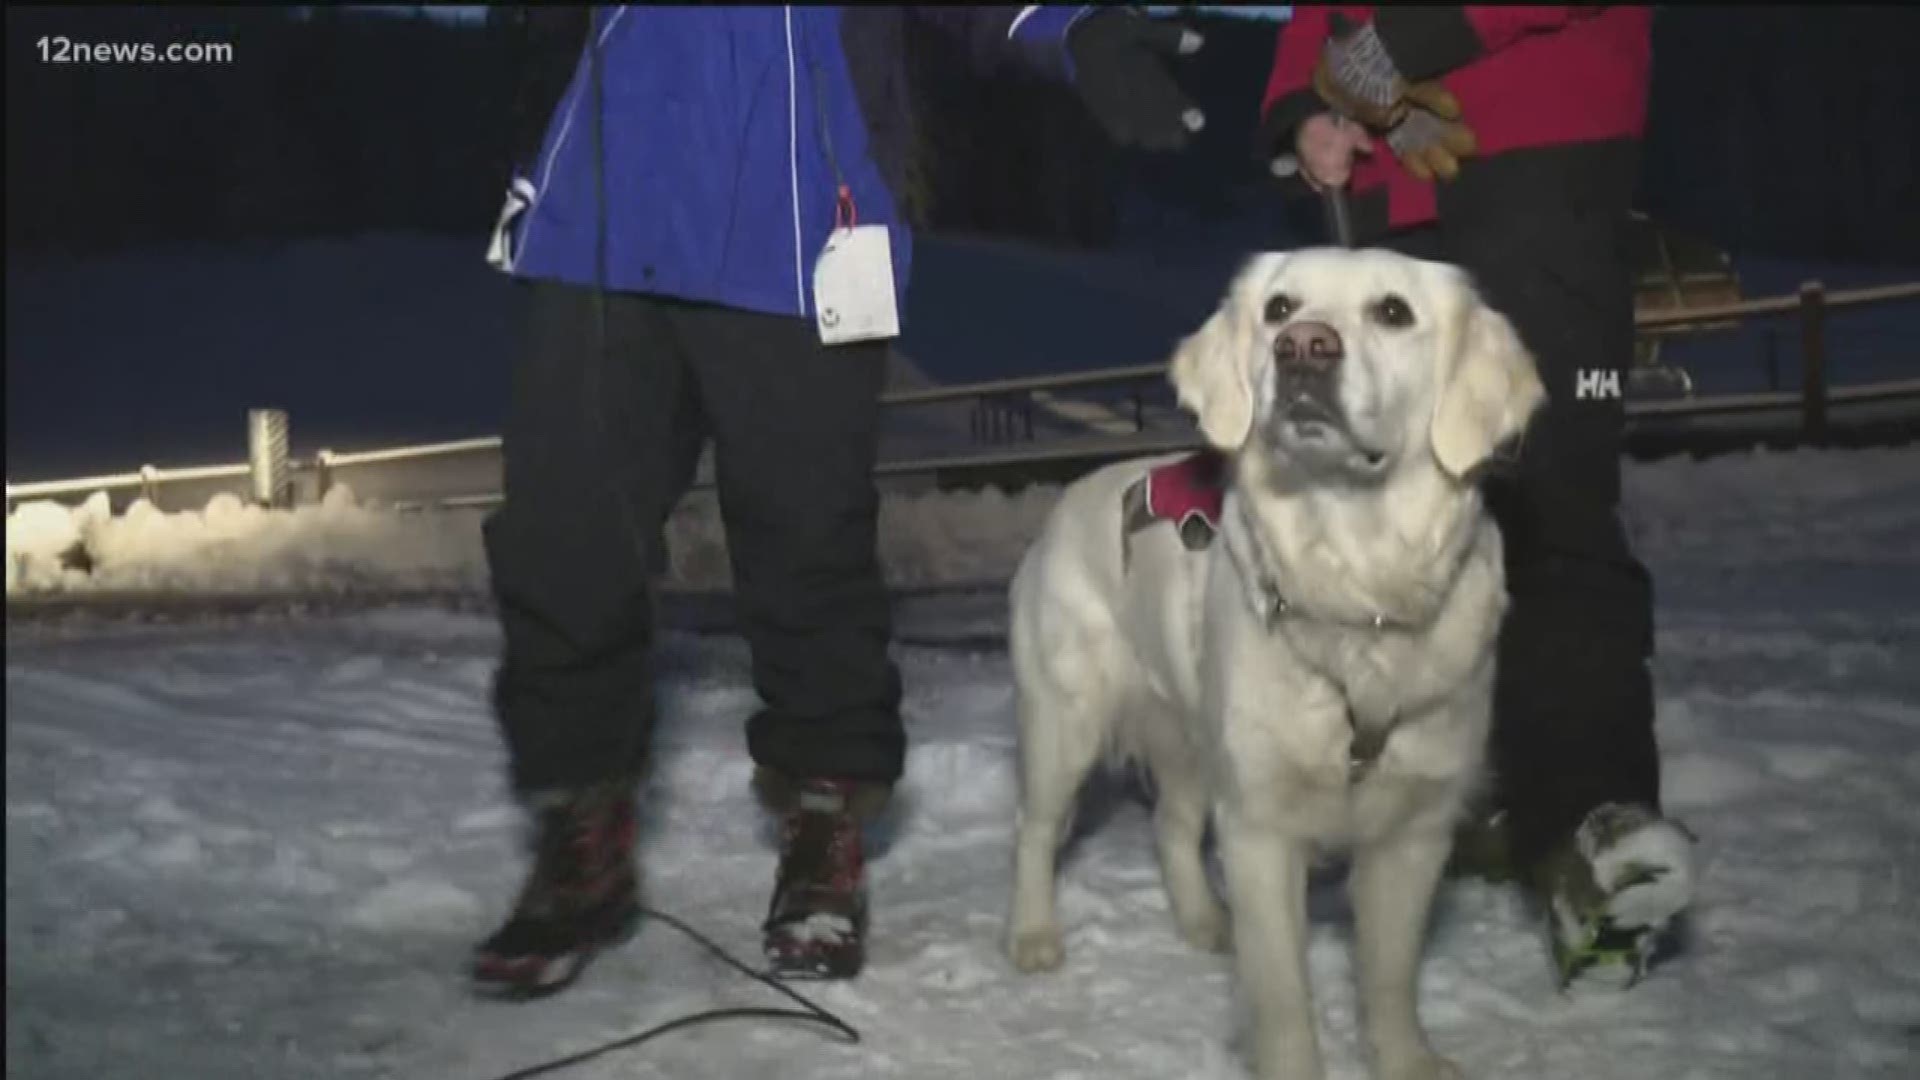 Ava the avalanche dog is ready for opening day at Arizona Snowbowl. Colleen Sikora has the latest snow update in Flagstaff.